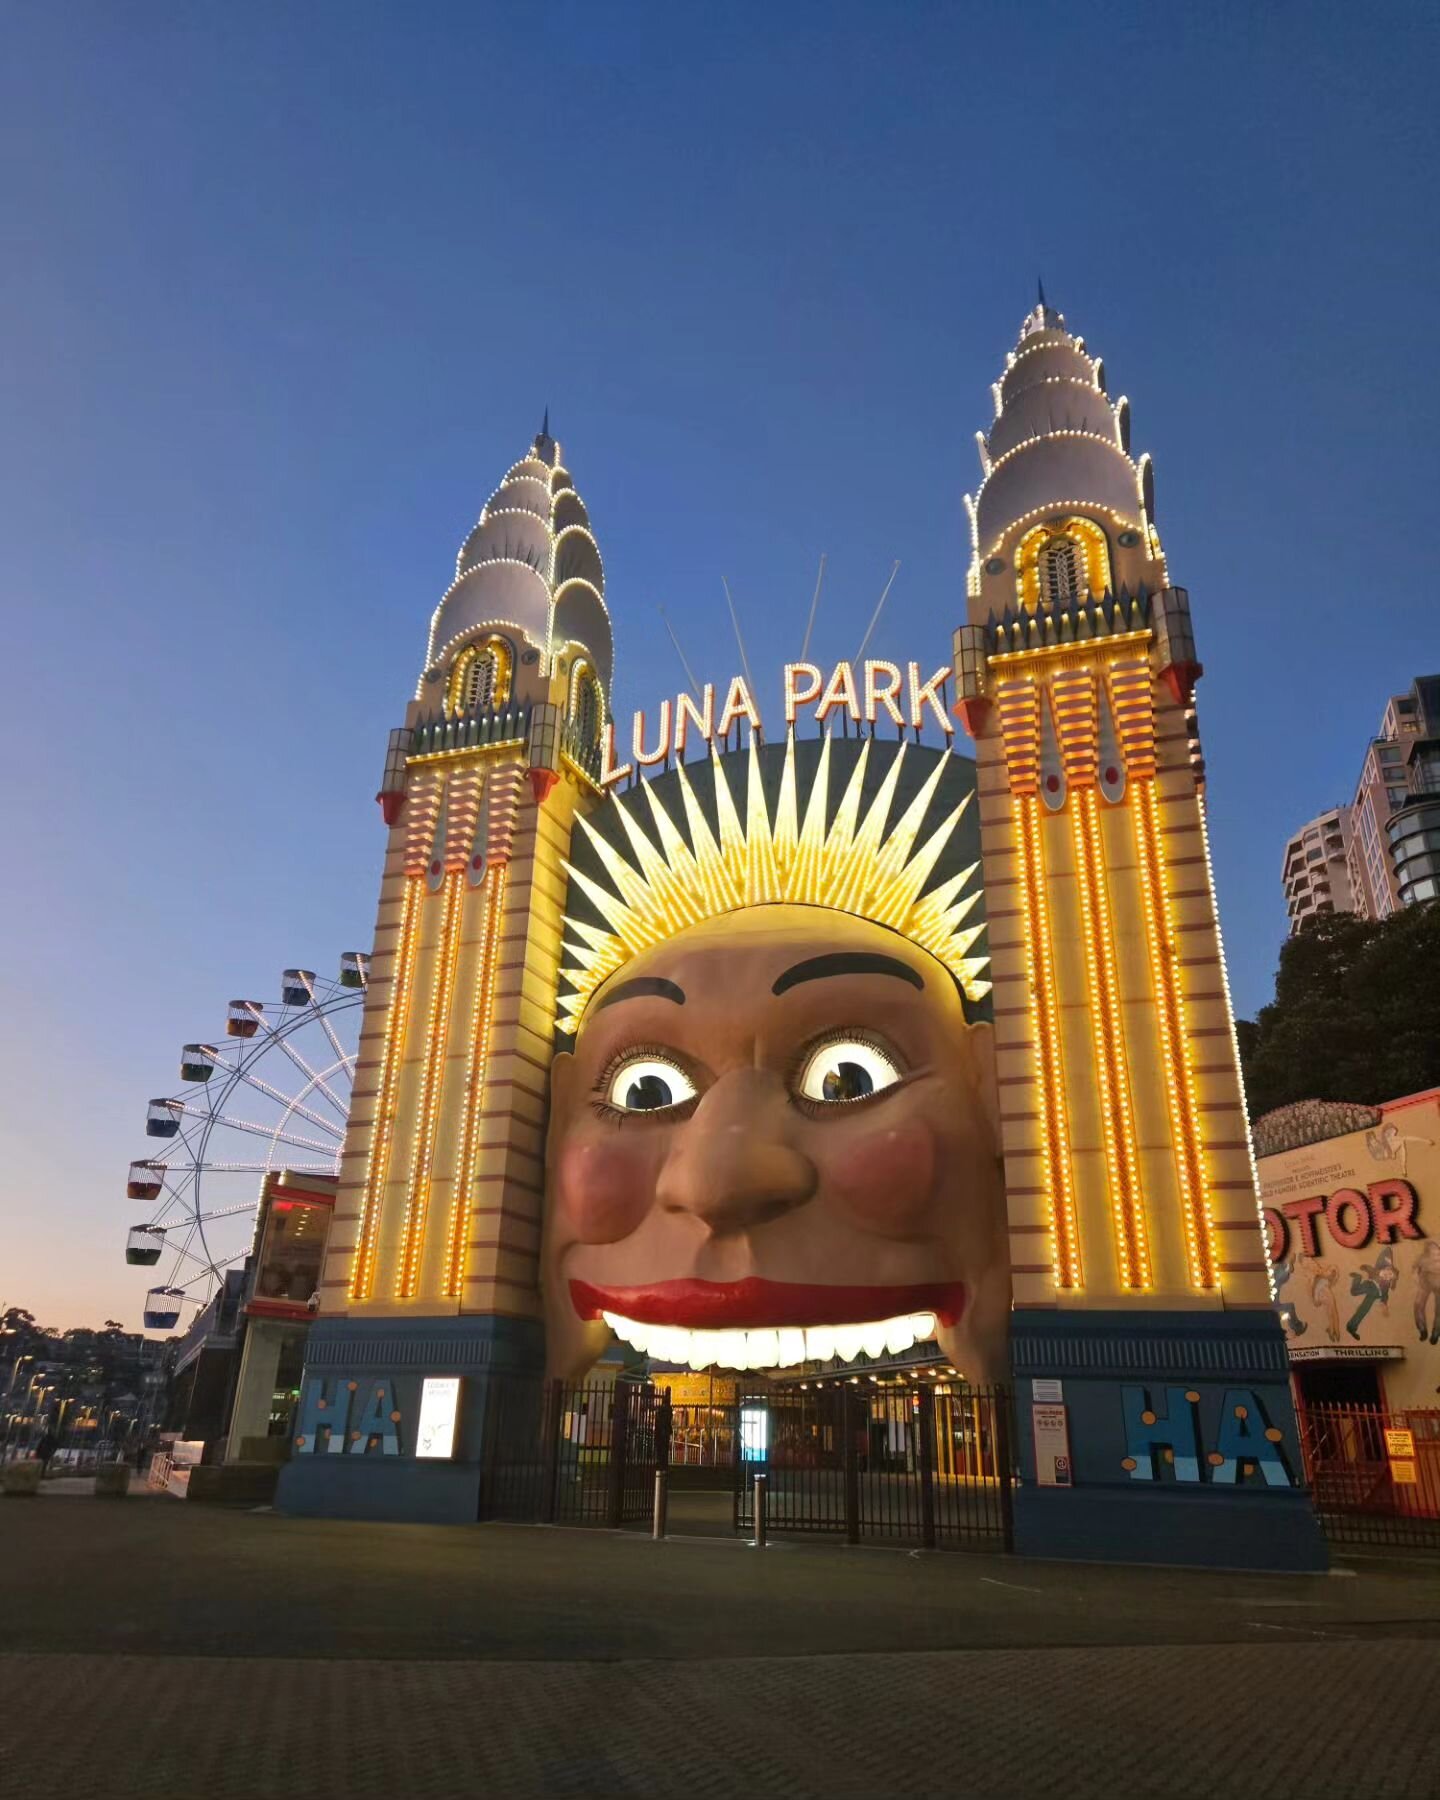 I absolutely ✨️LOVE✨️Luna Park in Sydney! Such a silly, fun and oddly nostalgic place. I'm not a huge fan of fair rides but I sure do love me some fairy floss!! We enjoyed the big light up face entryway so much we ended up running back to it on a mor